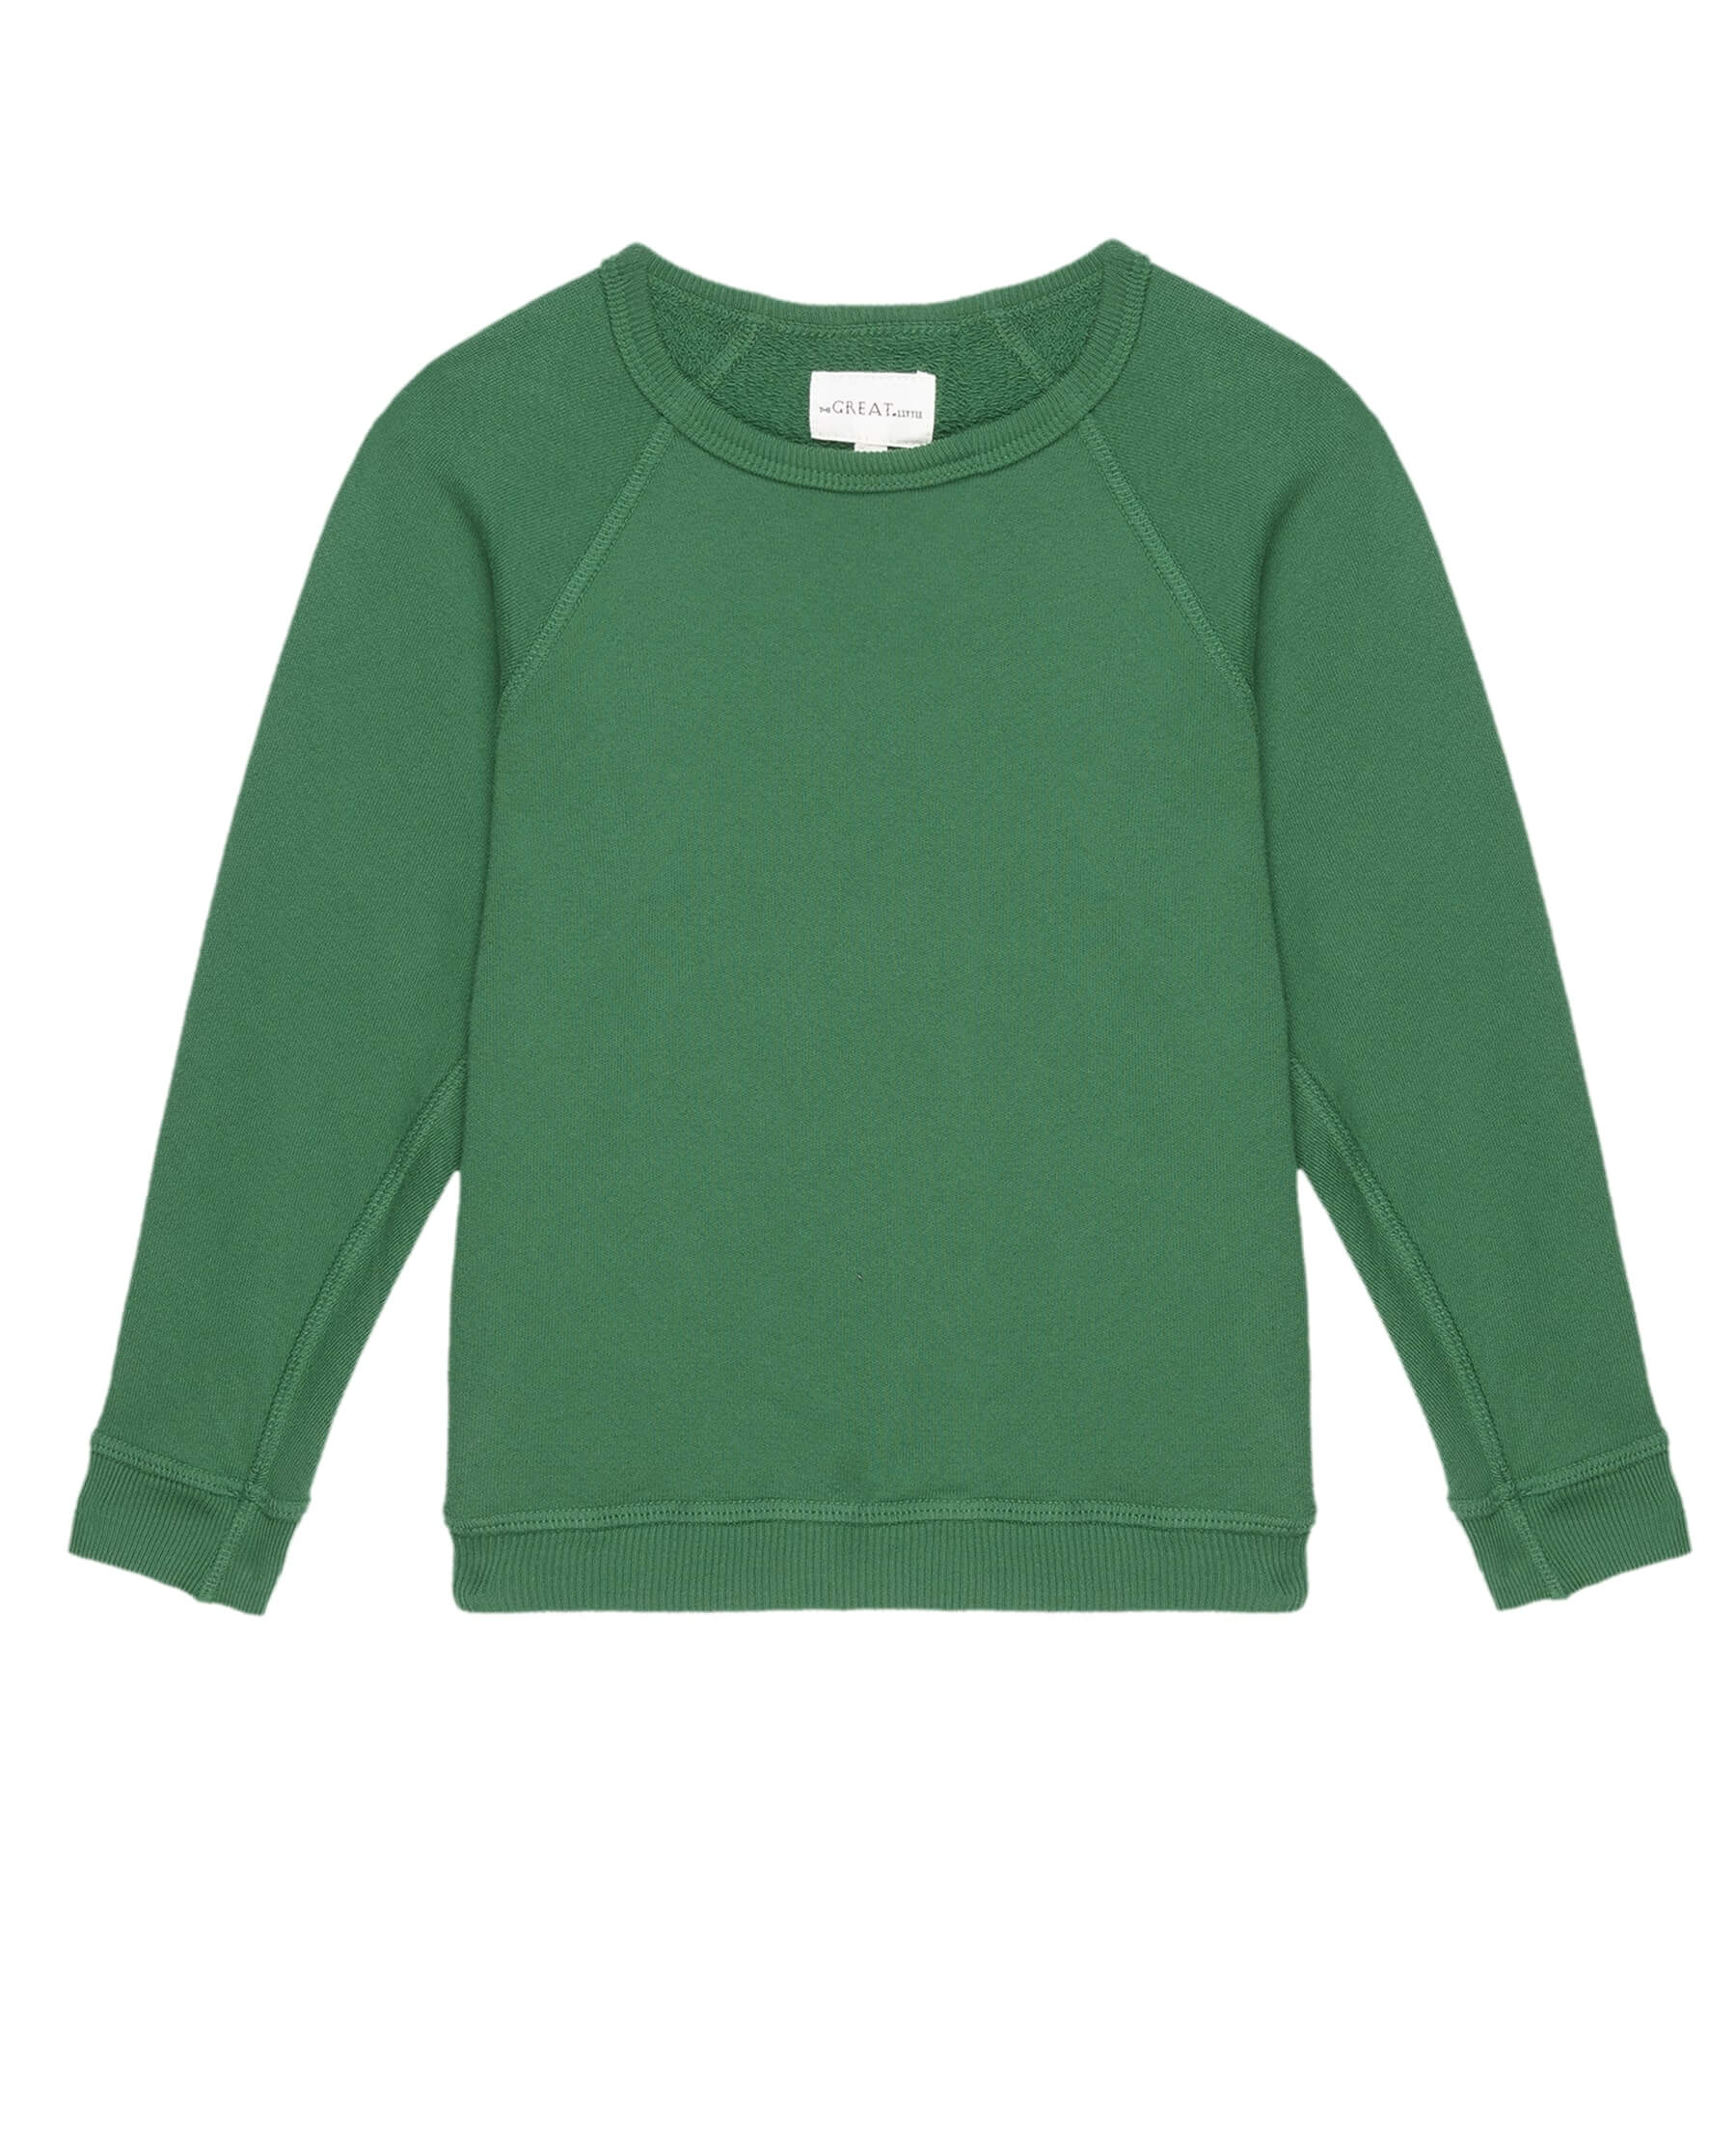 The Little College Sweatshirt. Solid -- Holly Leaf SWEATSHIRTS THE GREAT. HOL 23 LITTLE